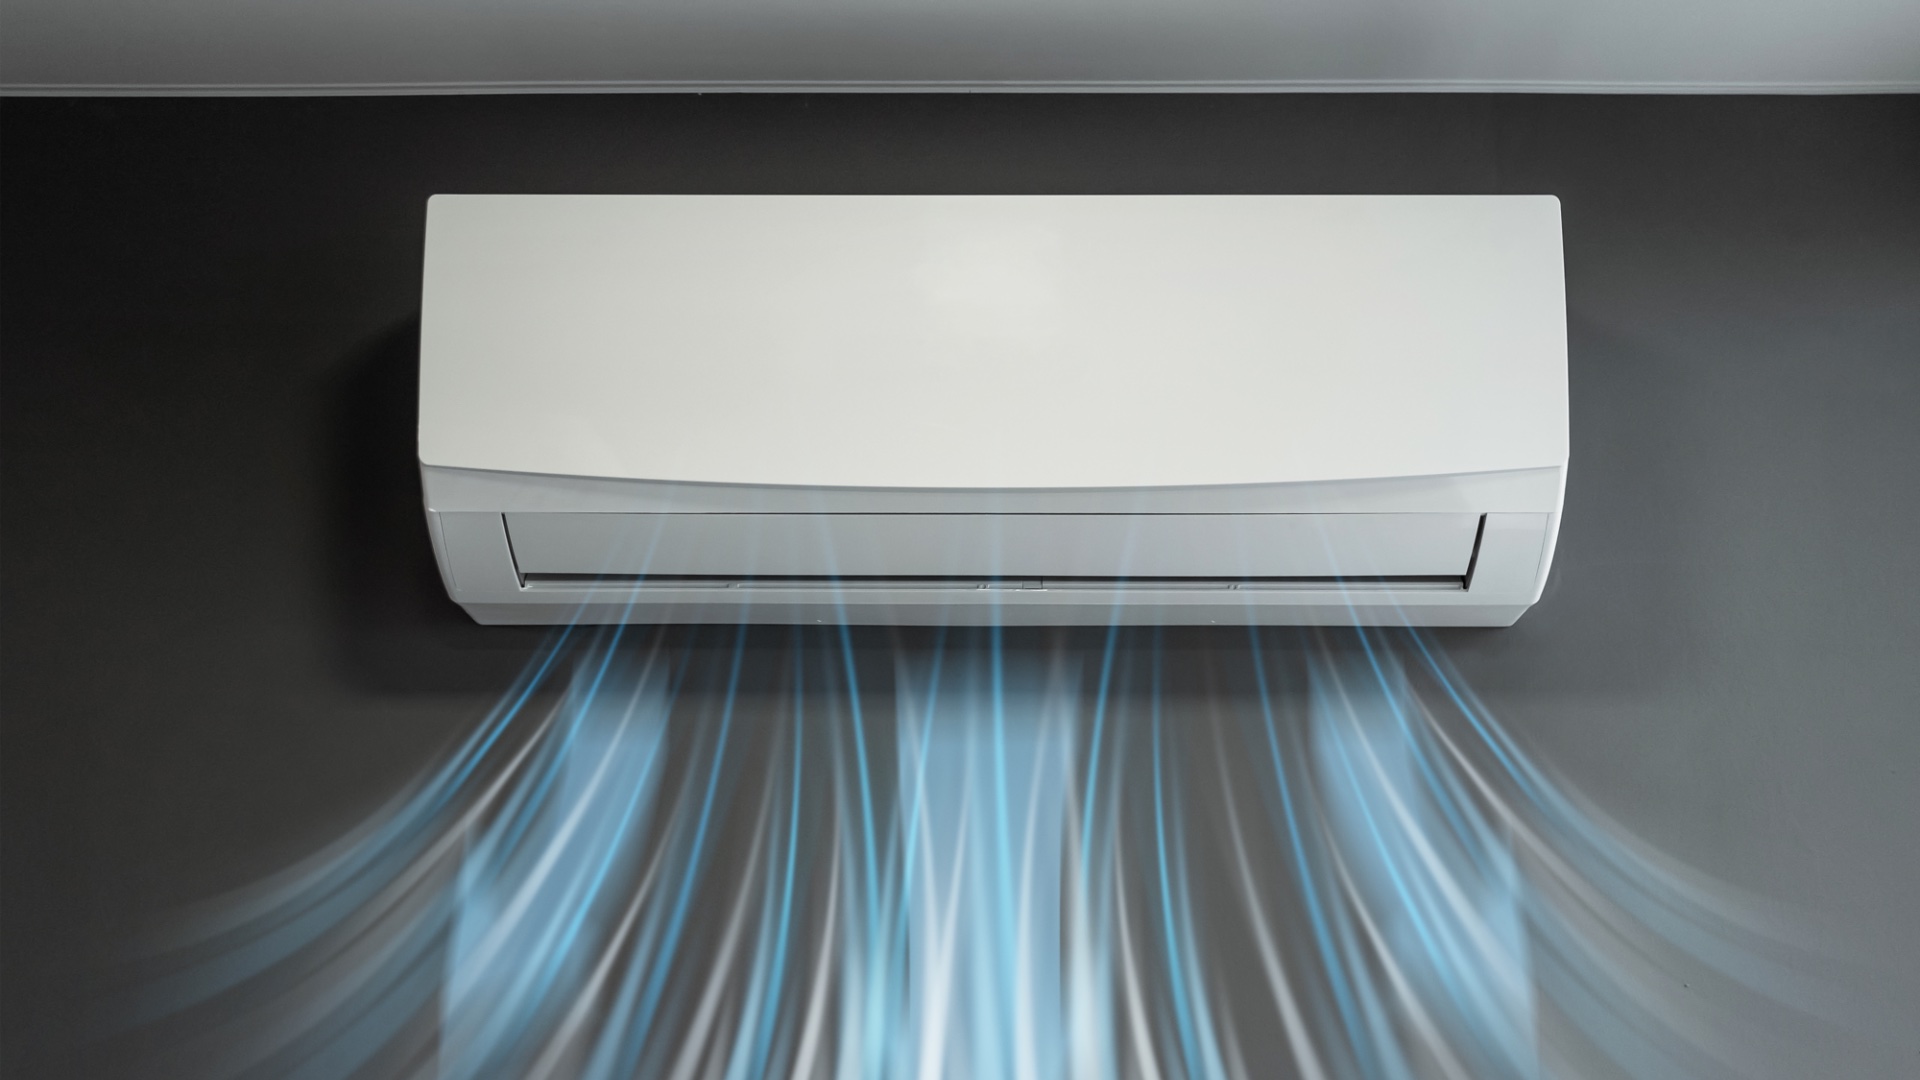 Select the Right Air Conditioner Provider and Save Money